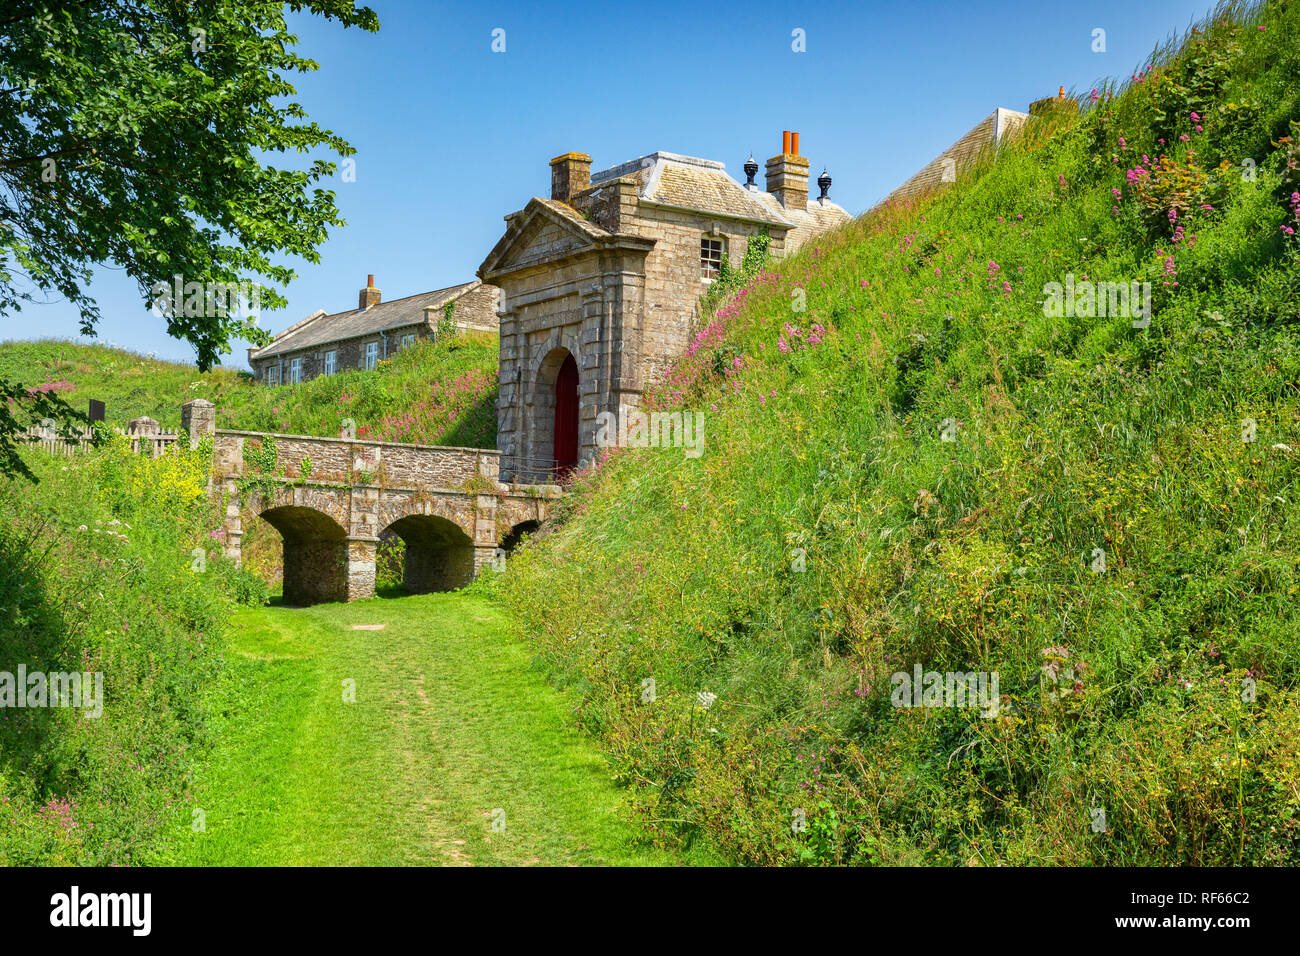 The Gatehouse and Moat, Pendennis Castle, Cornwall, UK Stock Photo